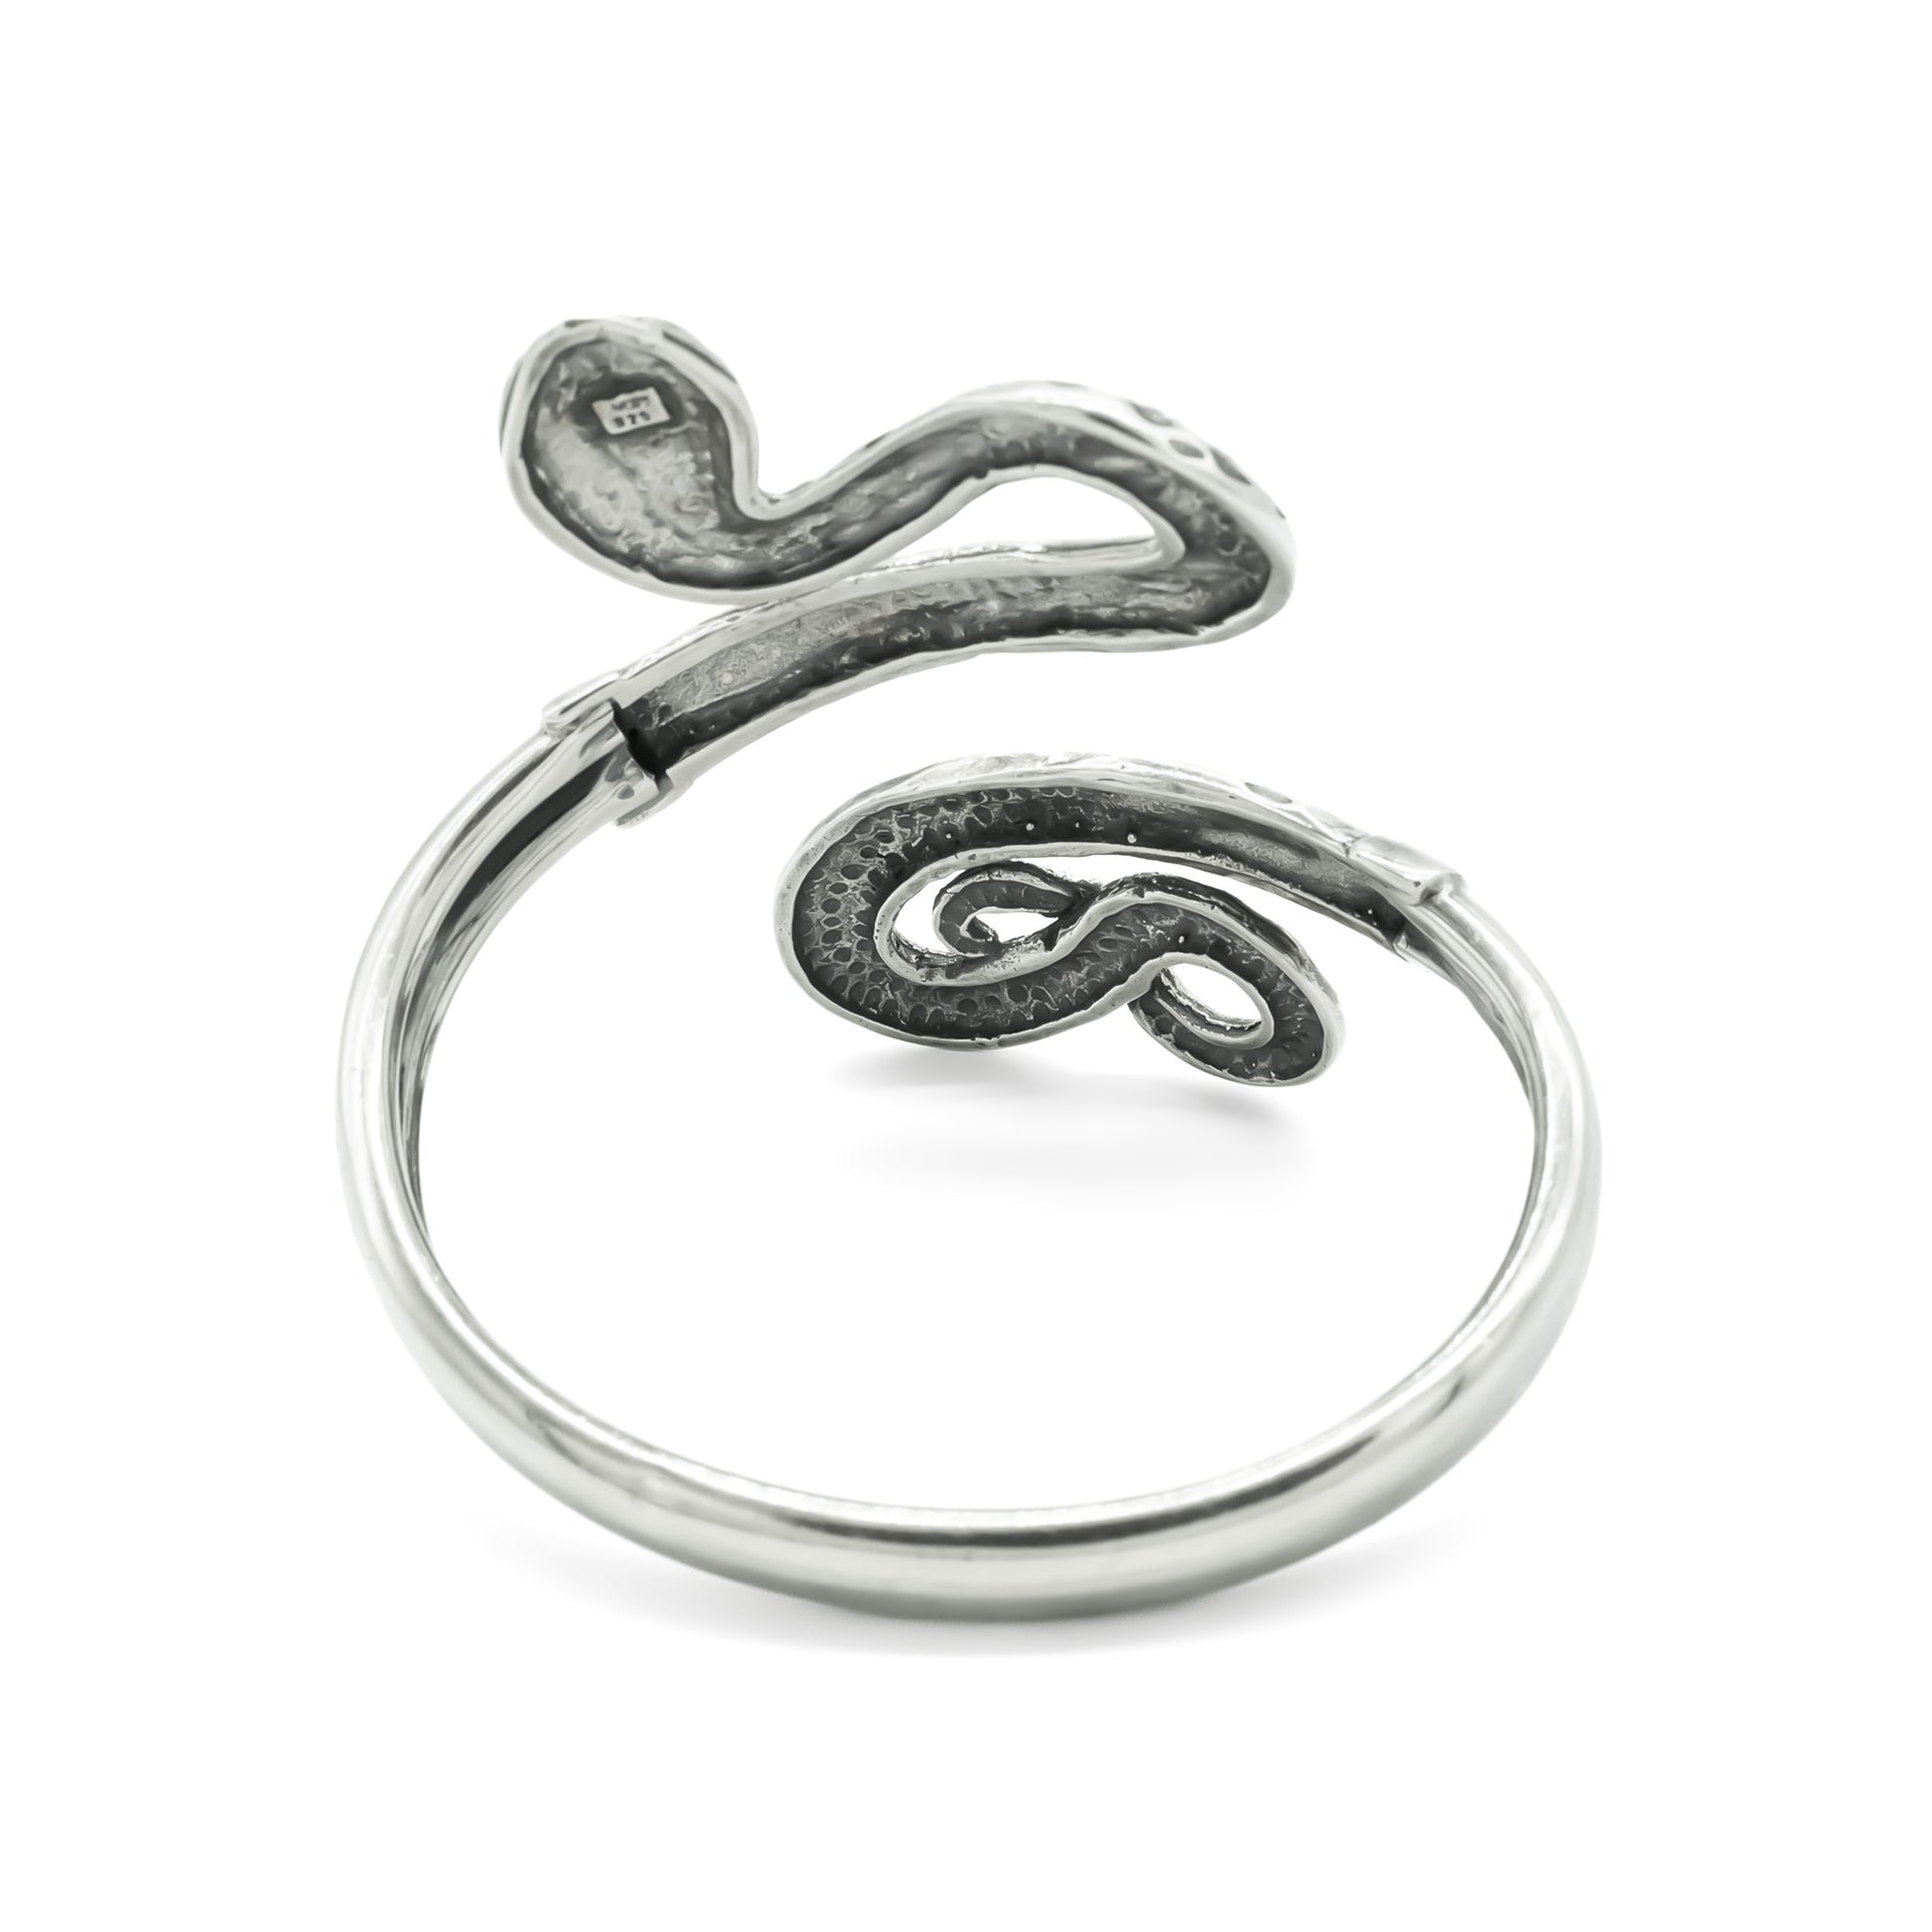 Magnificent sterling silver serpent bangle that coils around the arm. Size adjustable. Italy